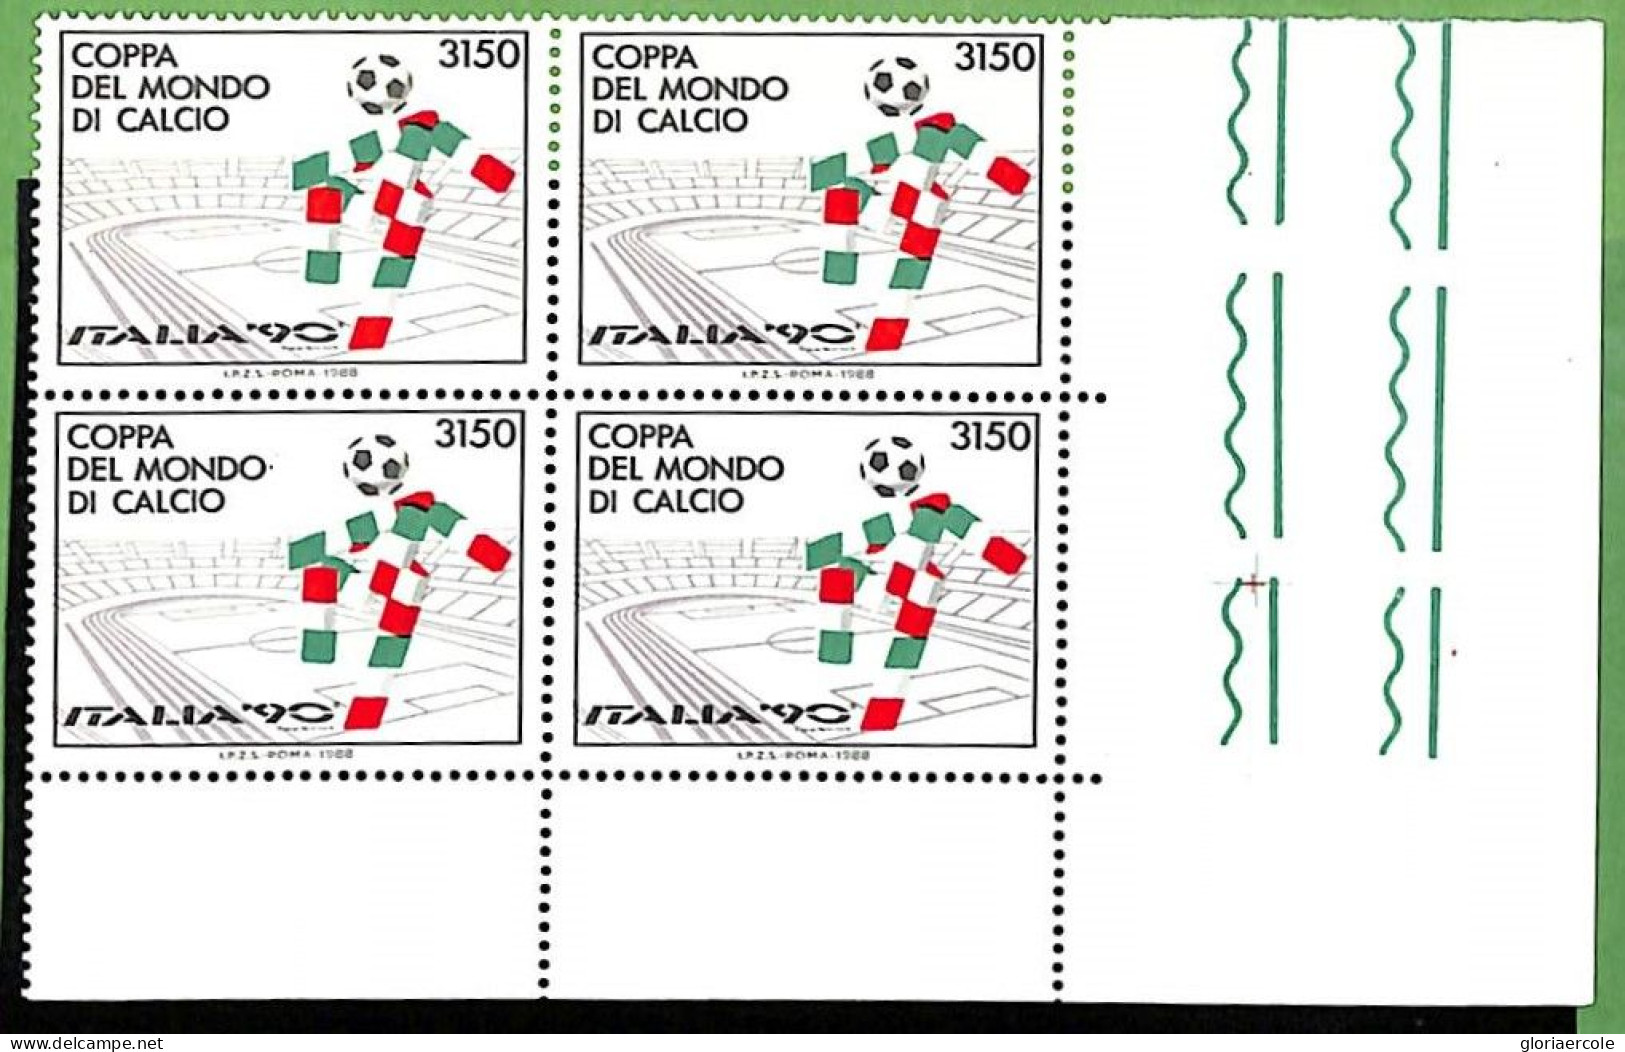 A1199 - ITALY - STAMPS - FOOTBALL  1990 Block Of 4 DOUBLE PRINT ERROR - Raybaudi - Unused Stamps